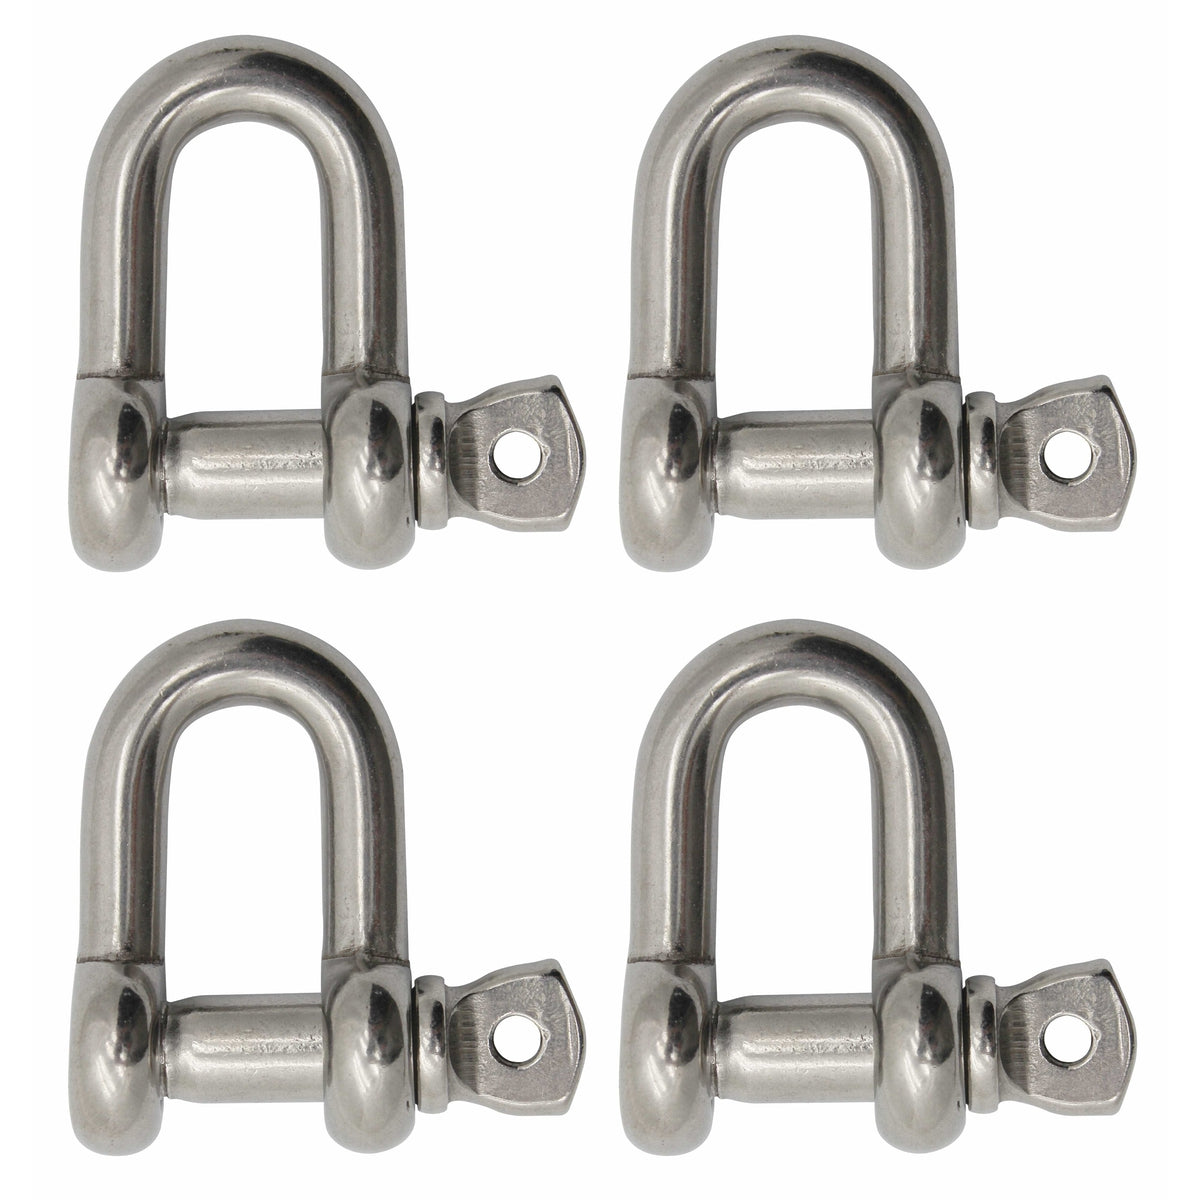 Extreme Max BoatTector SS Chain Shackle 1" 4-pk #3006.8285.4